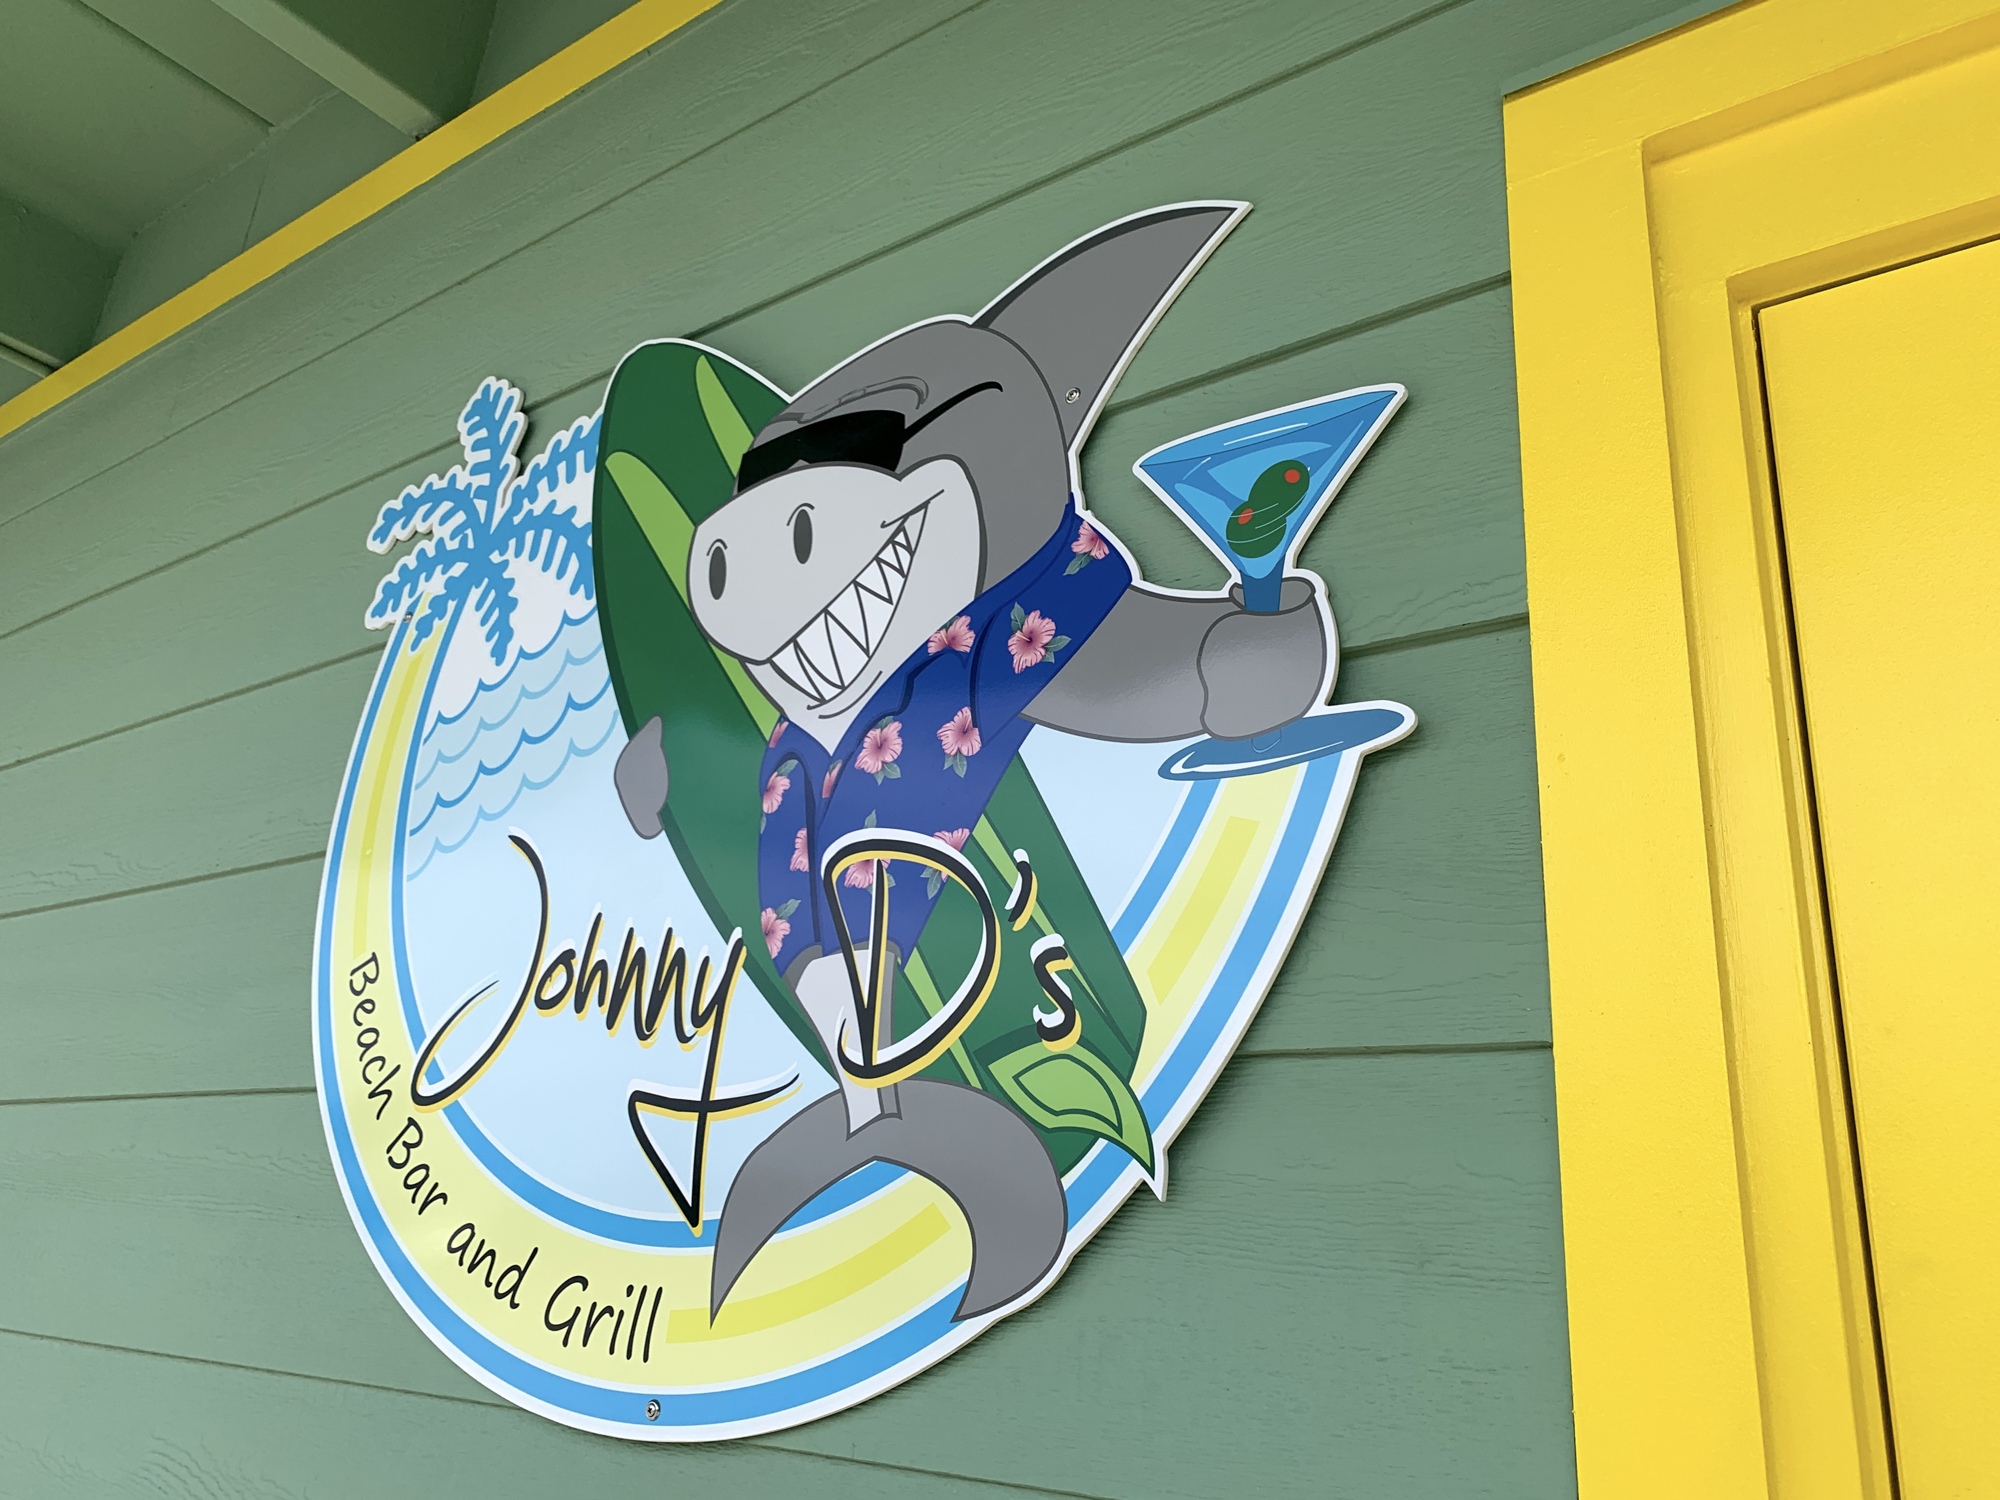 Johnny D's Beach Bar and Grill is open 11 a.m. to 2 a.m. at 319 Moody Blvd., Flagler Beach.